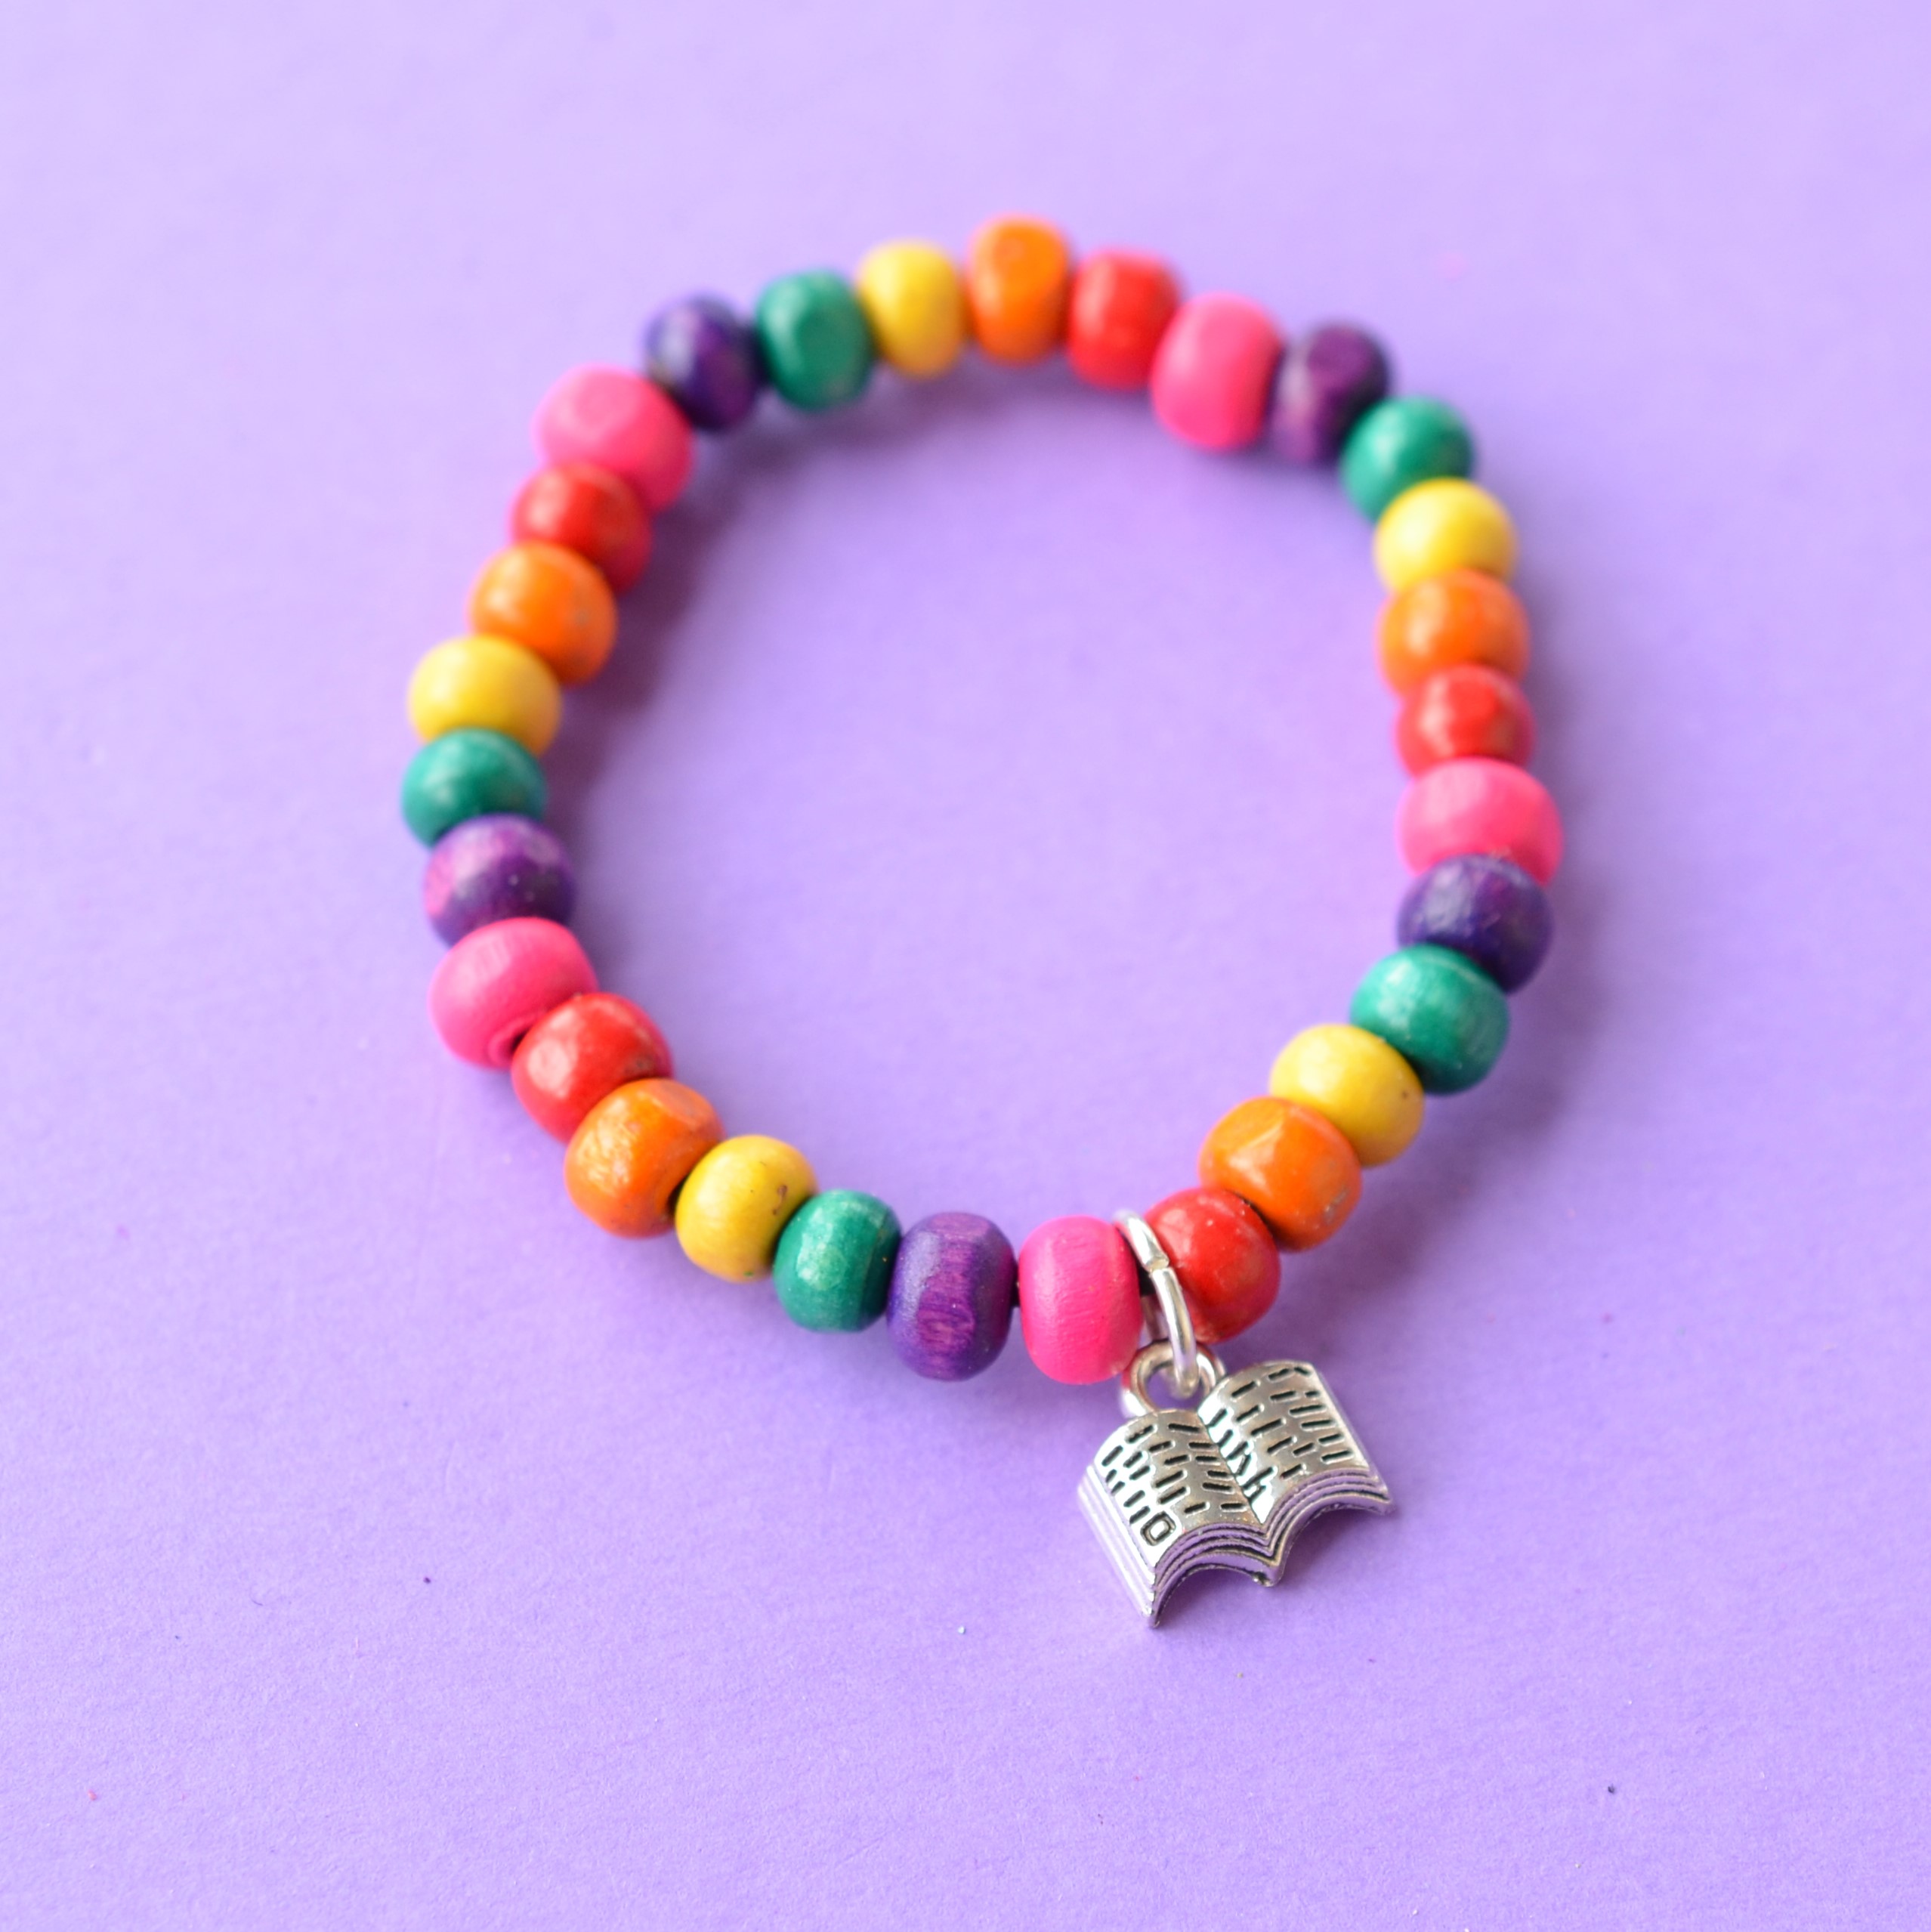 Book Colourful Child's Wooden Bead Charm Bracelet Reading